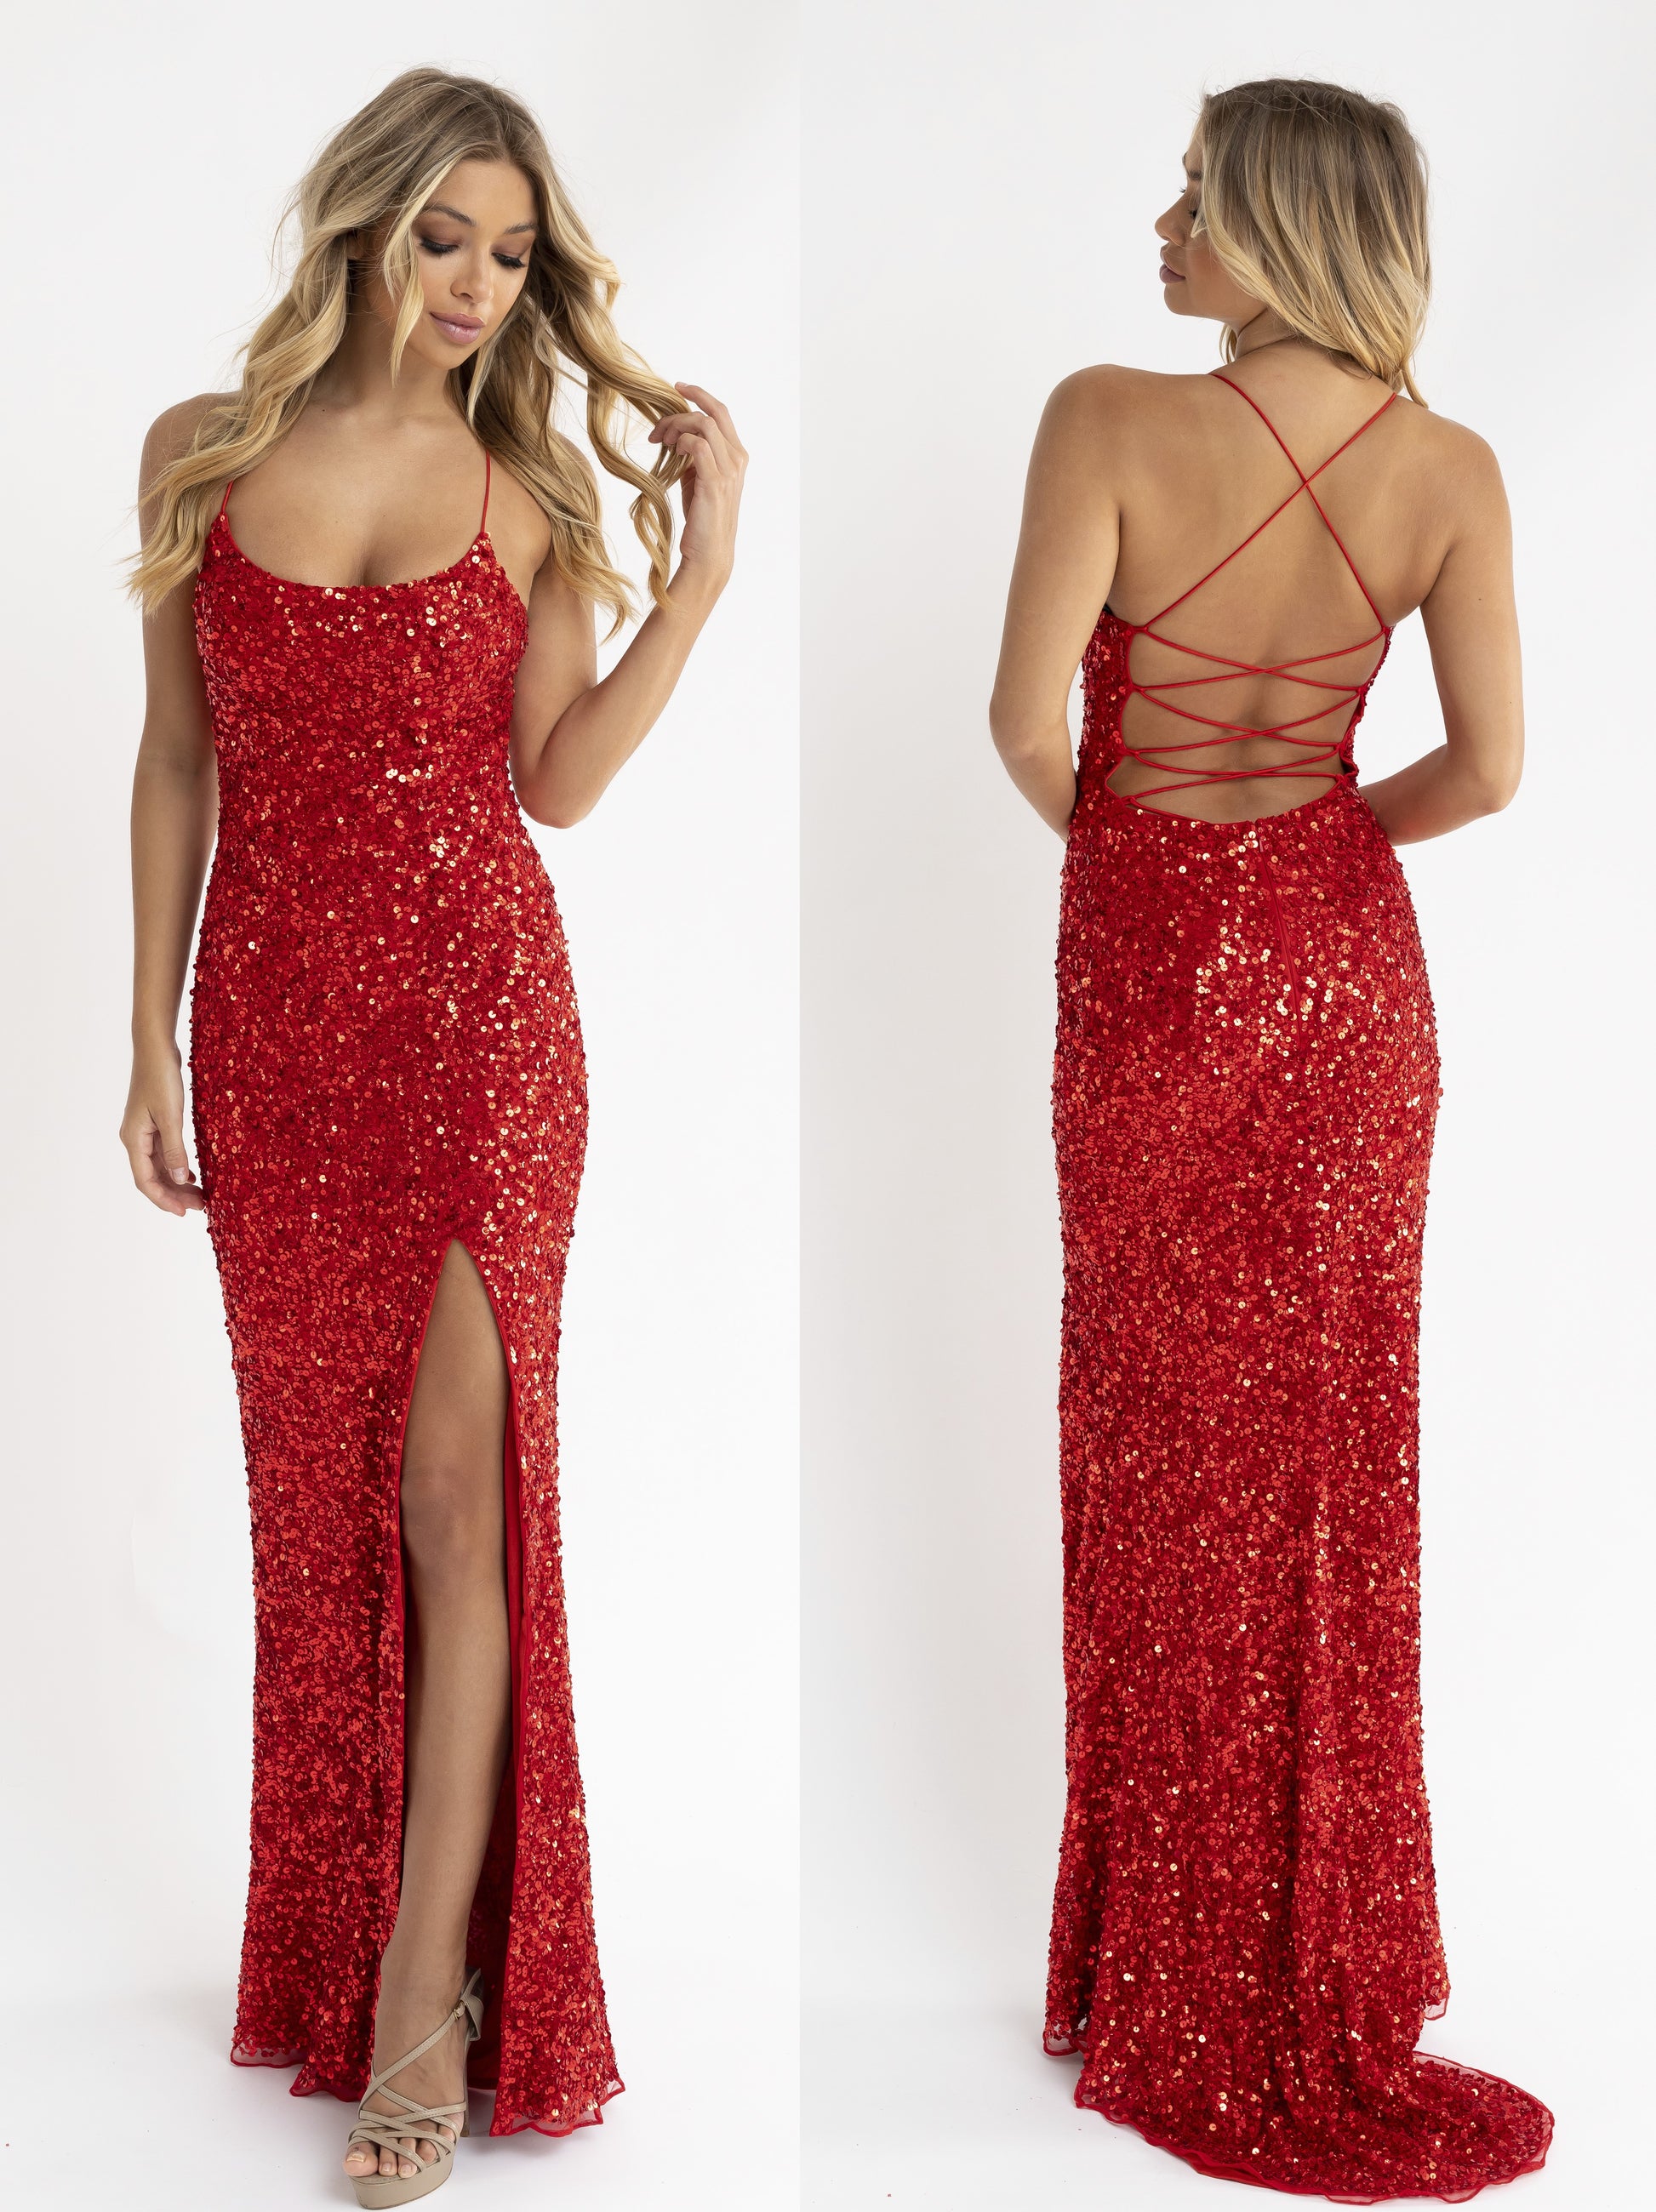 PRIMAVERA-COUTURE-3290-RED-PROM-DRESS-SCOOP-NECKLINE-LACE-UP-CORSET-BACK-TIE-SIDE-SLIT-SWEEPING-TRAIN